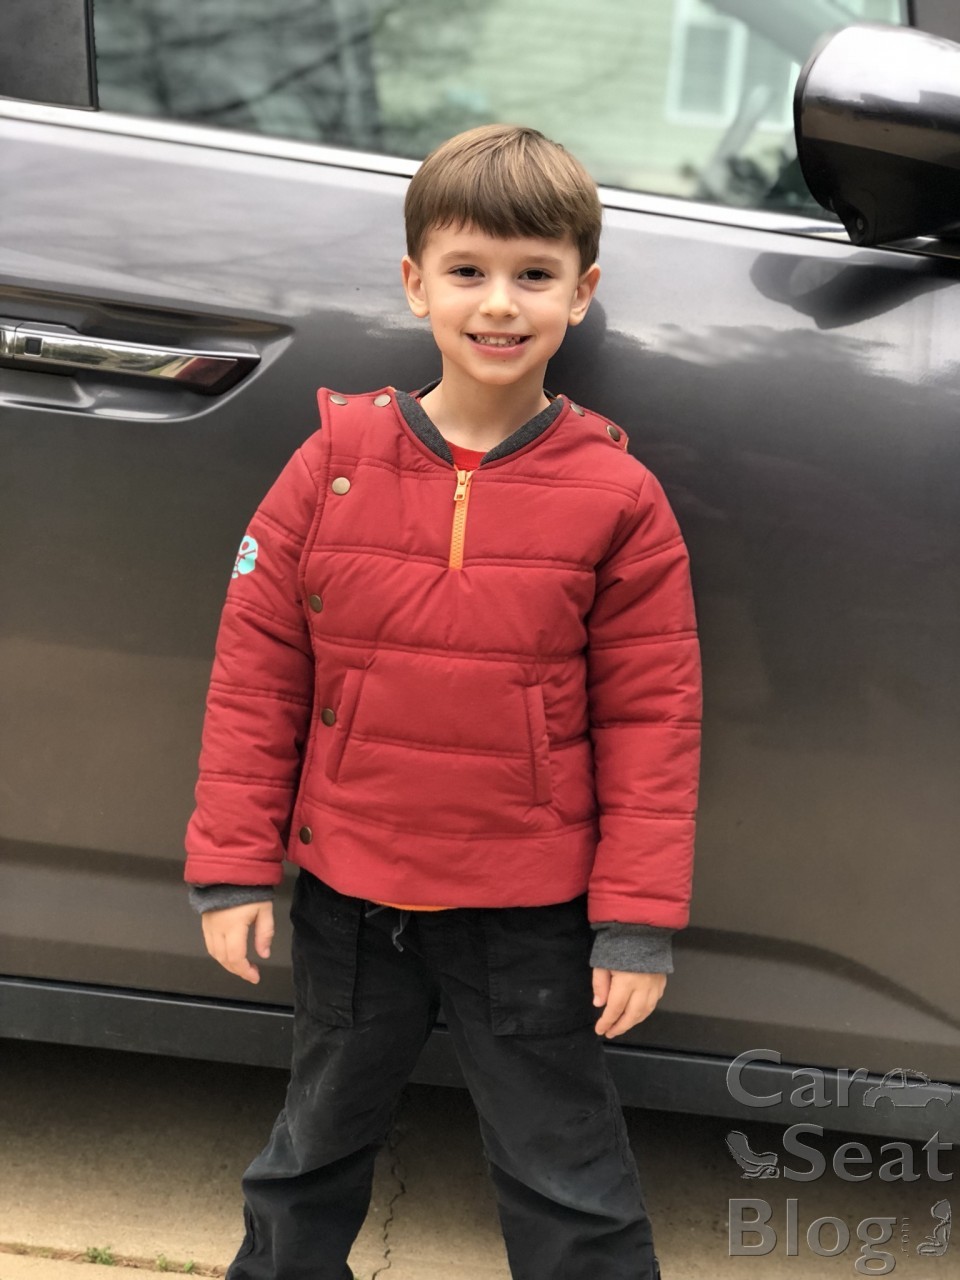 Baby, It's Cold Outside! Winter Coat Suggestions for Kids in Carseats –  CarseatBlog